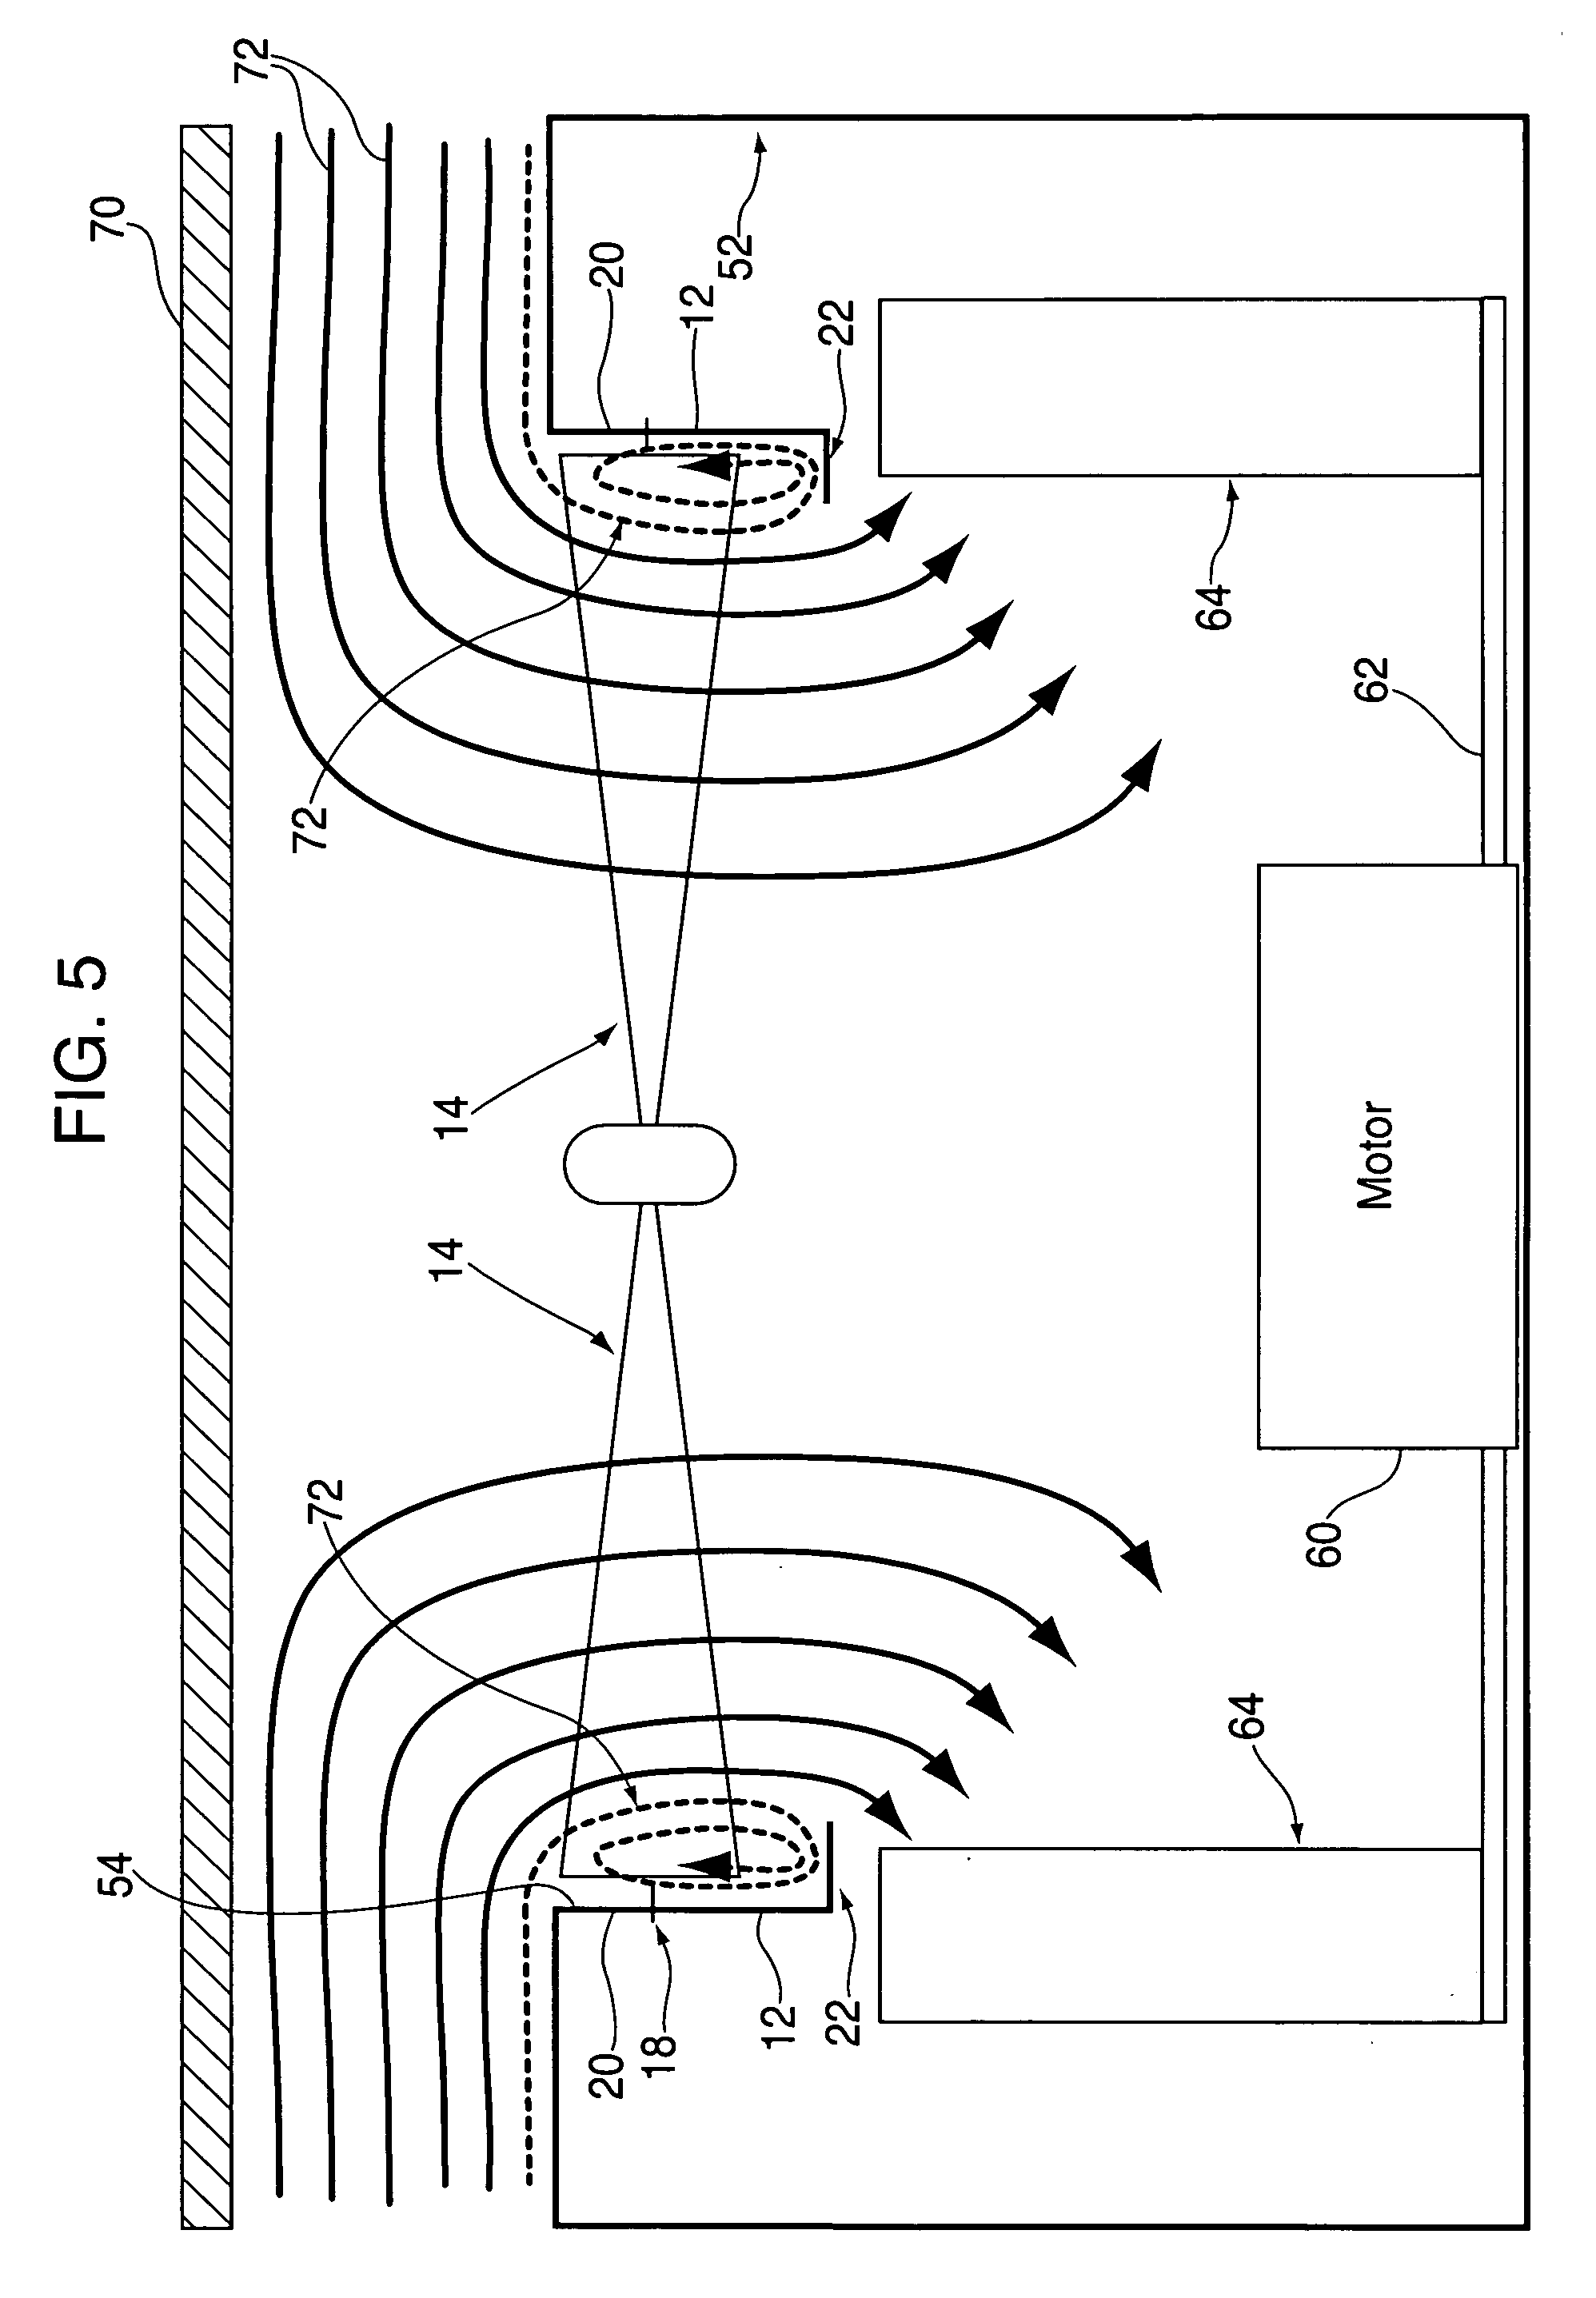 Method and apparatus for a low impedance anti-recirculation air moving inlet device